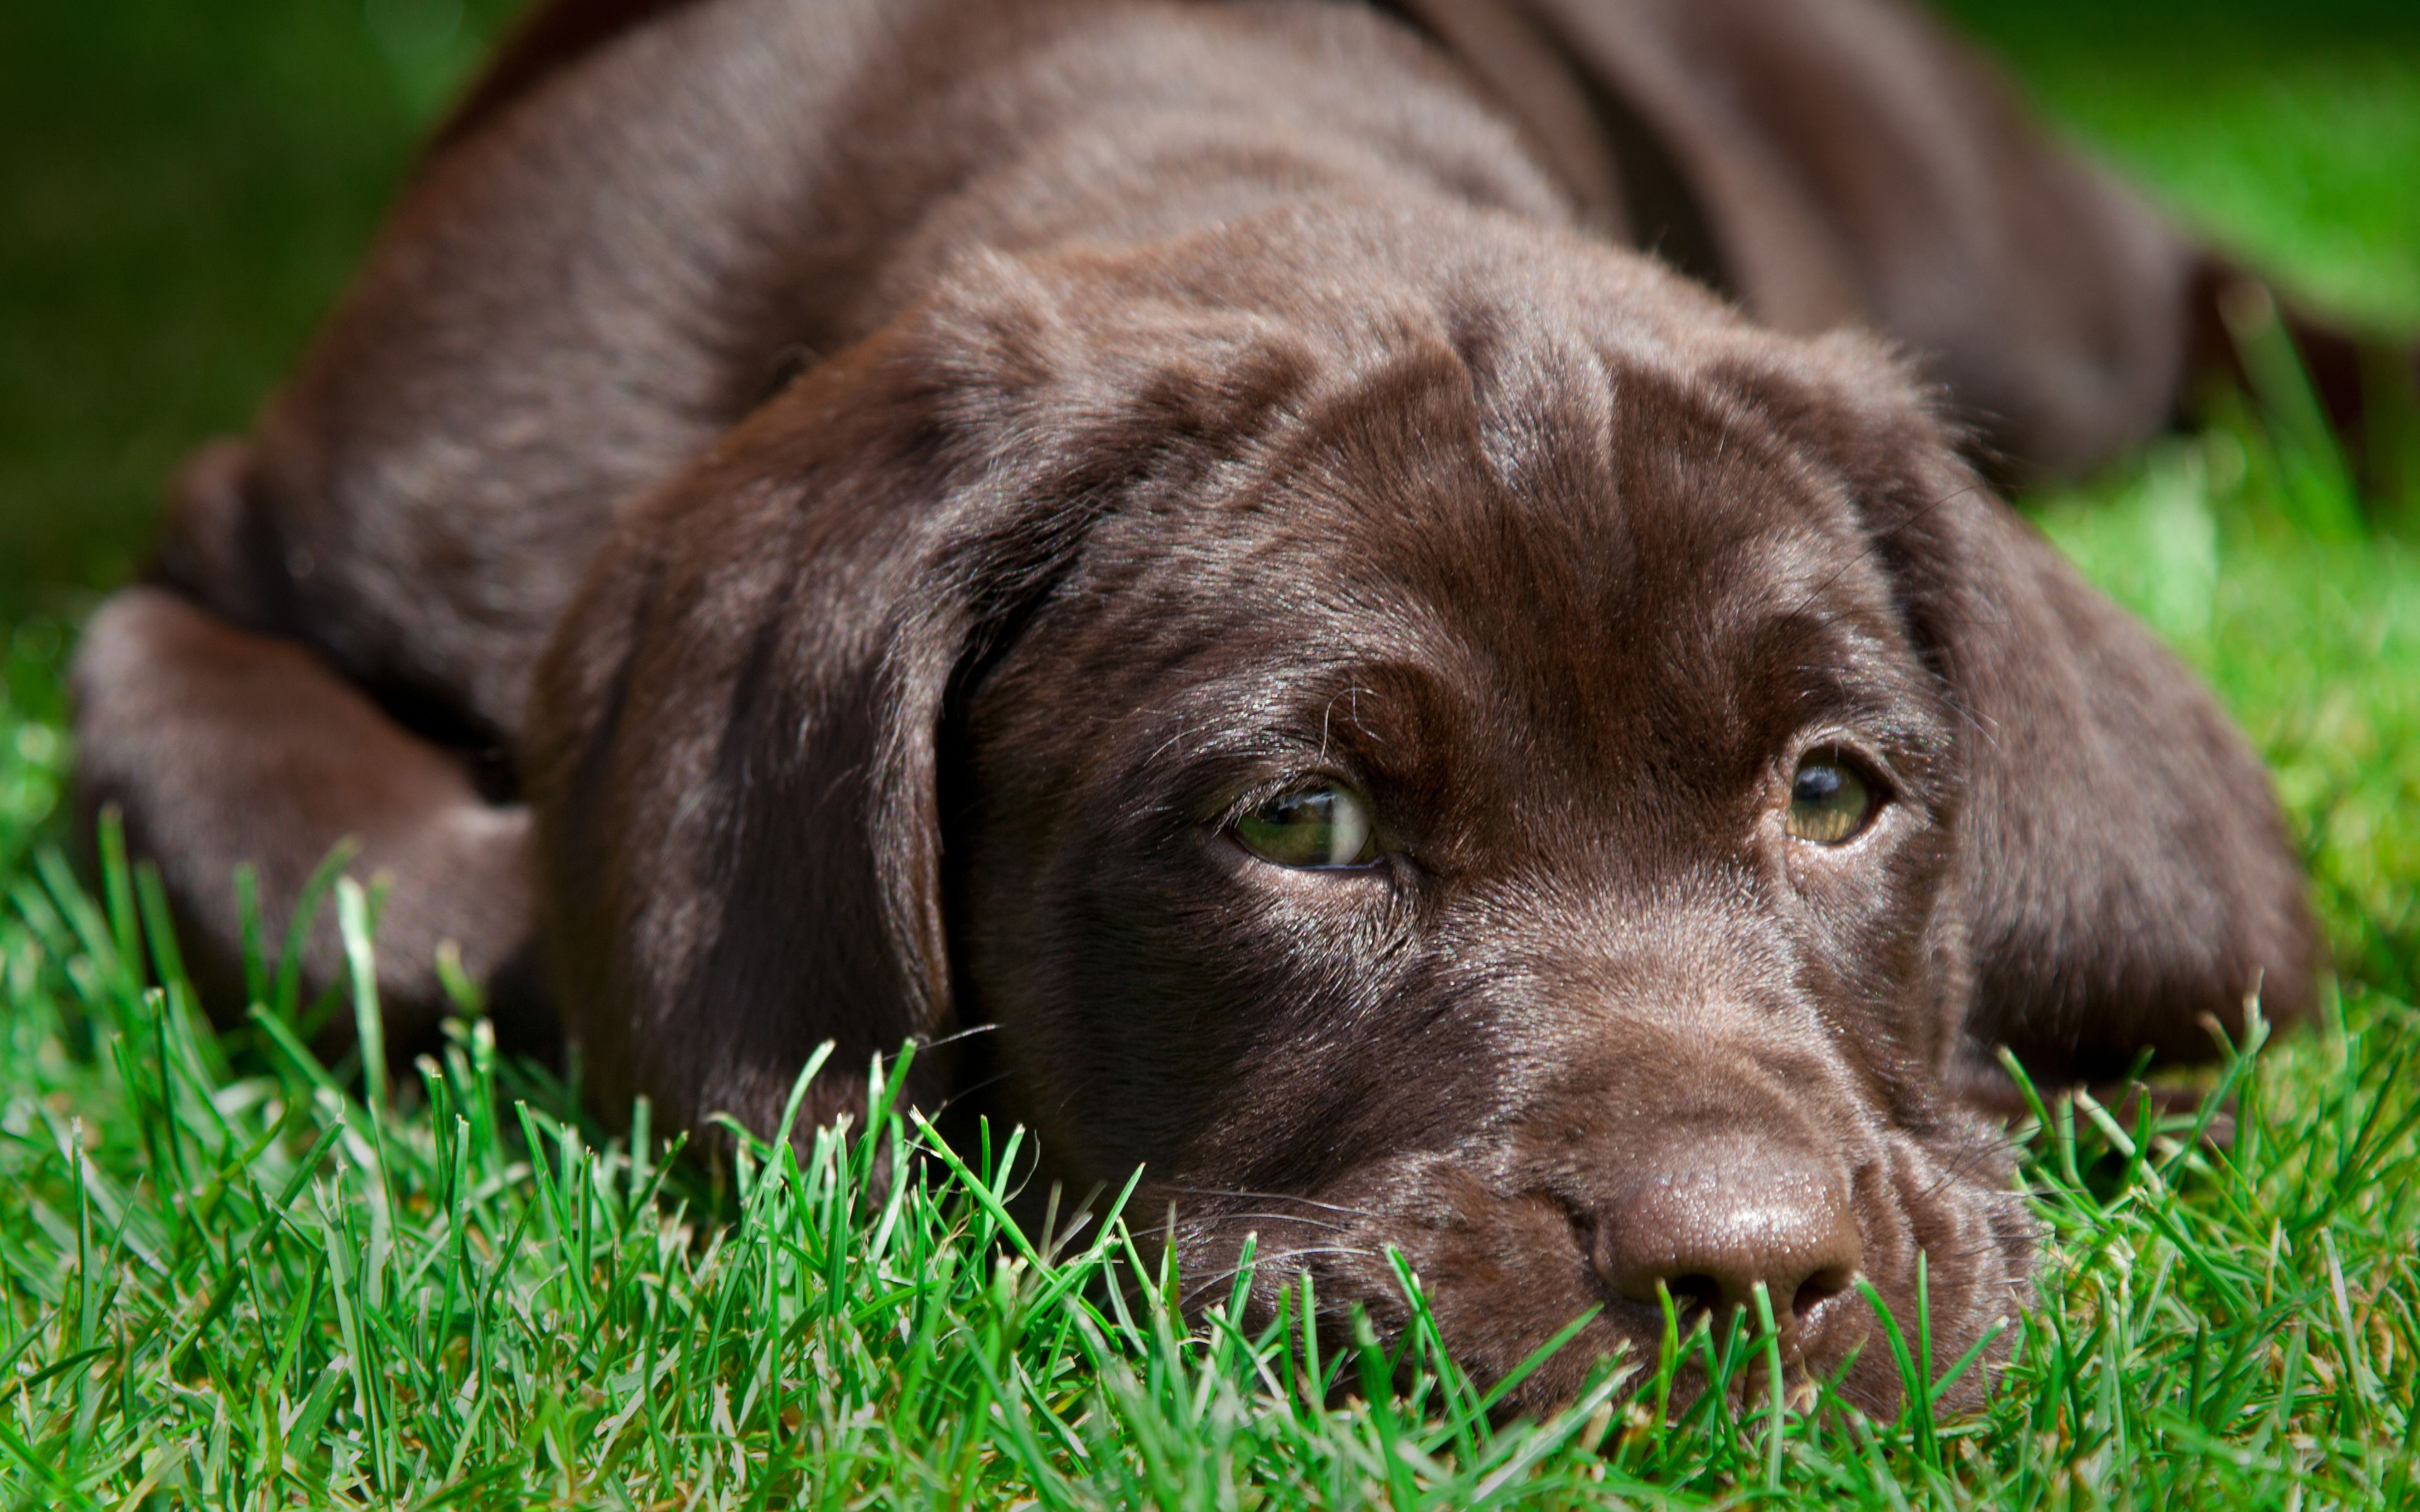 Download wallpaper 4k, chocolate labrador, grass, dogs, retriever, cute animals, labrador for desktop with resolution 3840x2400. High Quality HD picture wallpaper